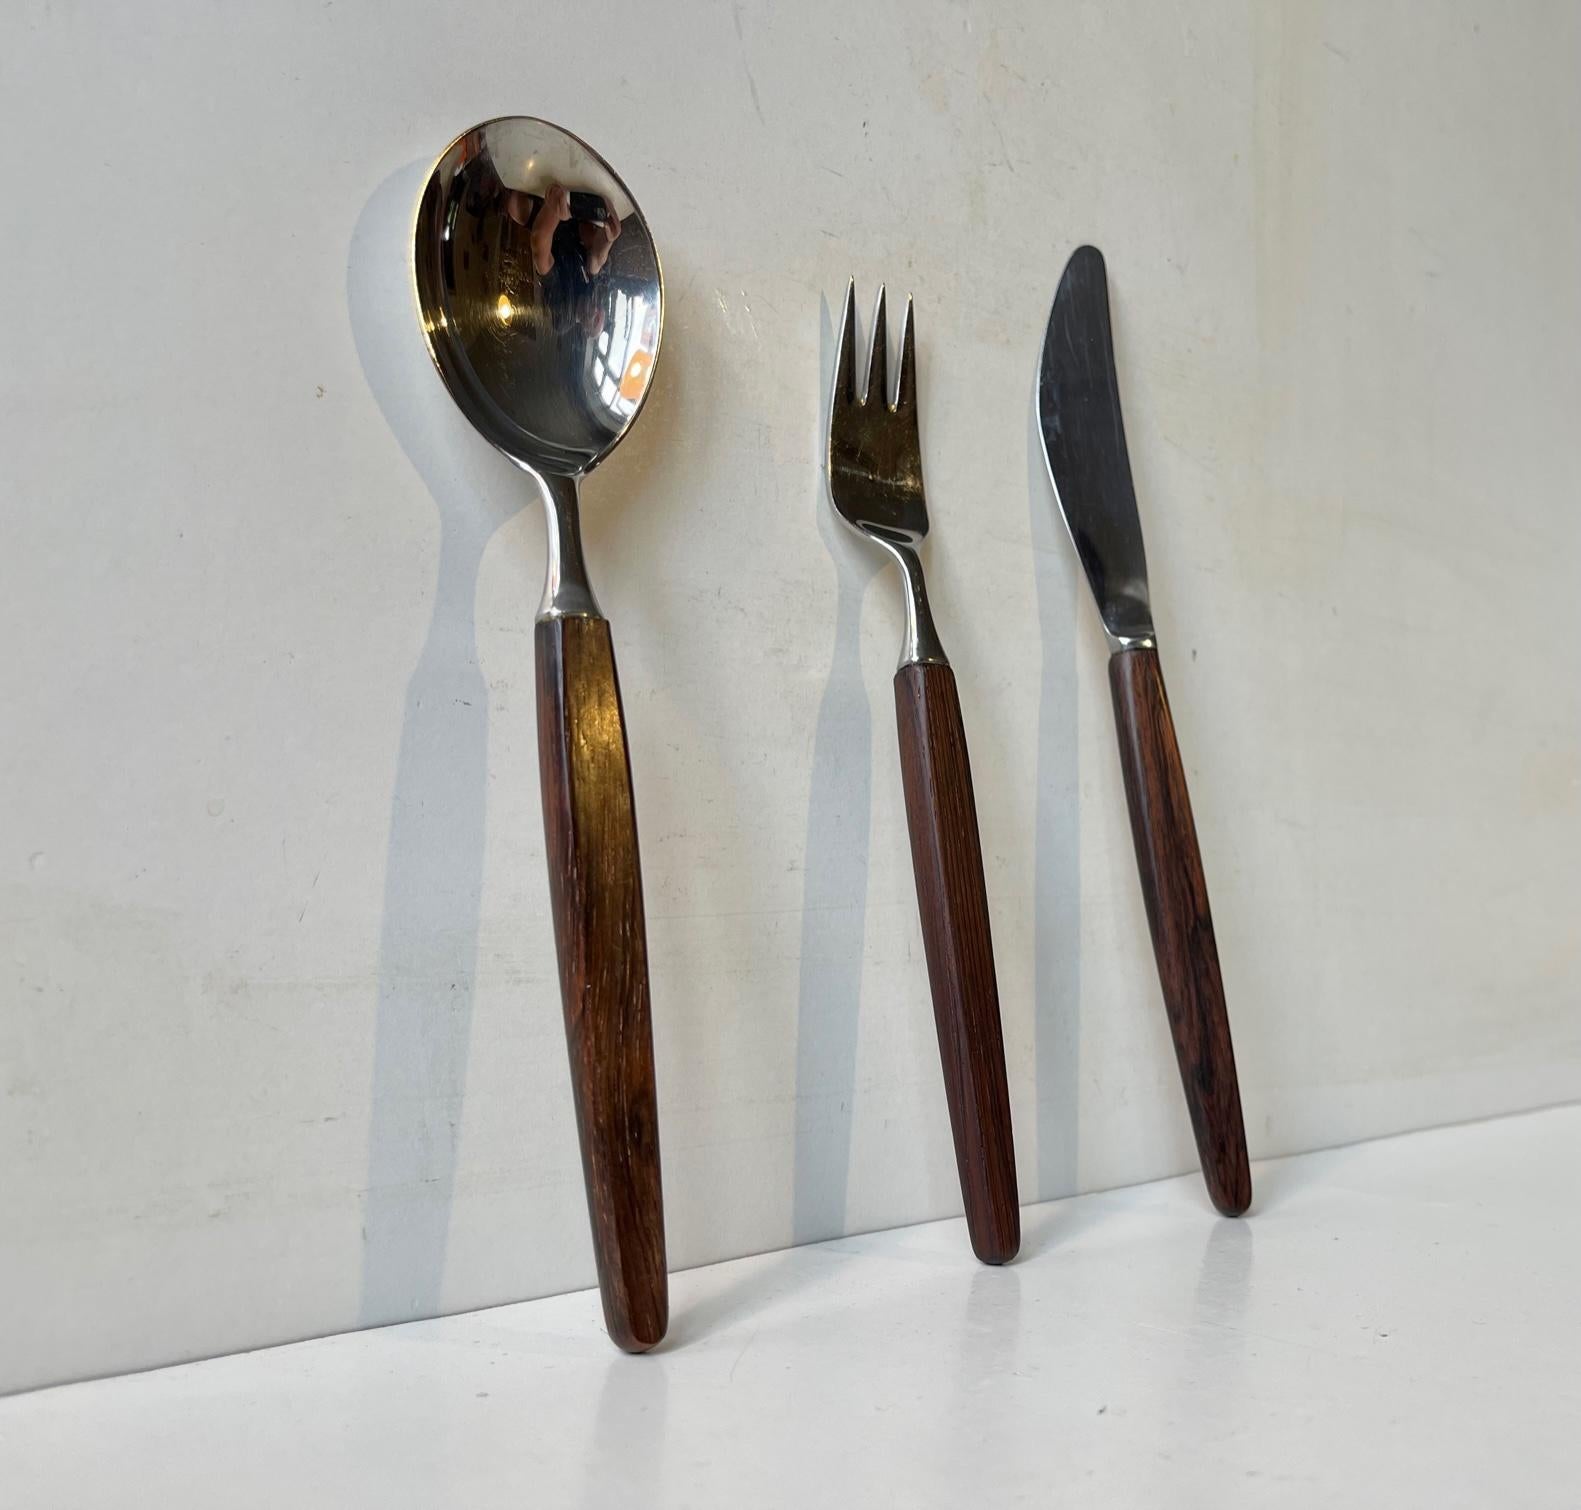 Tias Eckhoff Rosewood Flatware Cutlery set for 12 persons, Lundtofte 1960s In Good Condition For Sale In Esbjerg, DK